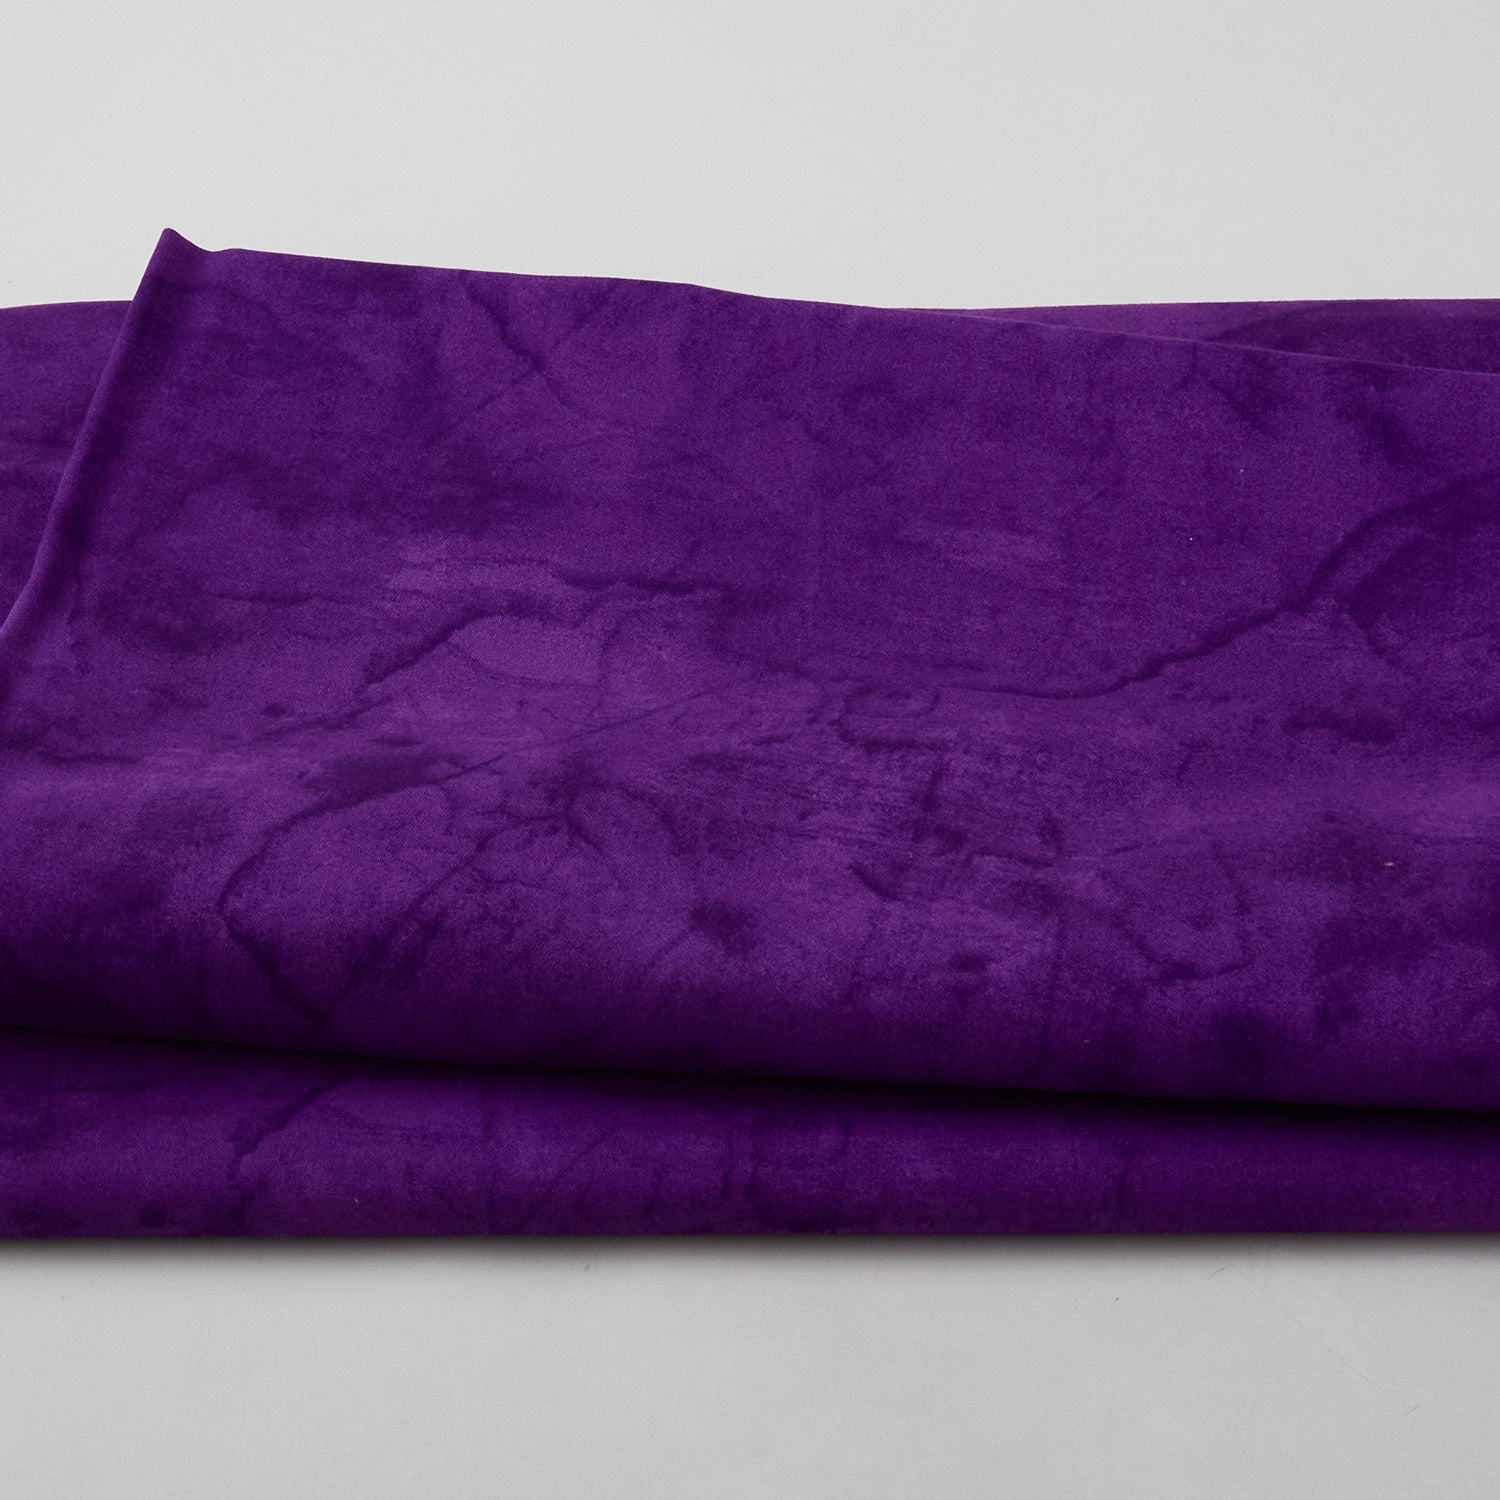 Kona® Cotton Cosmos Purple Solid Cotton Fabric by the Yard (1987